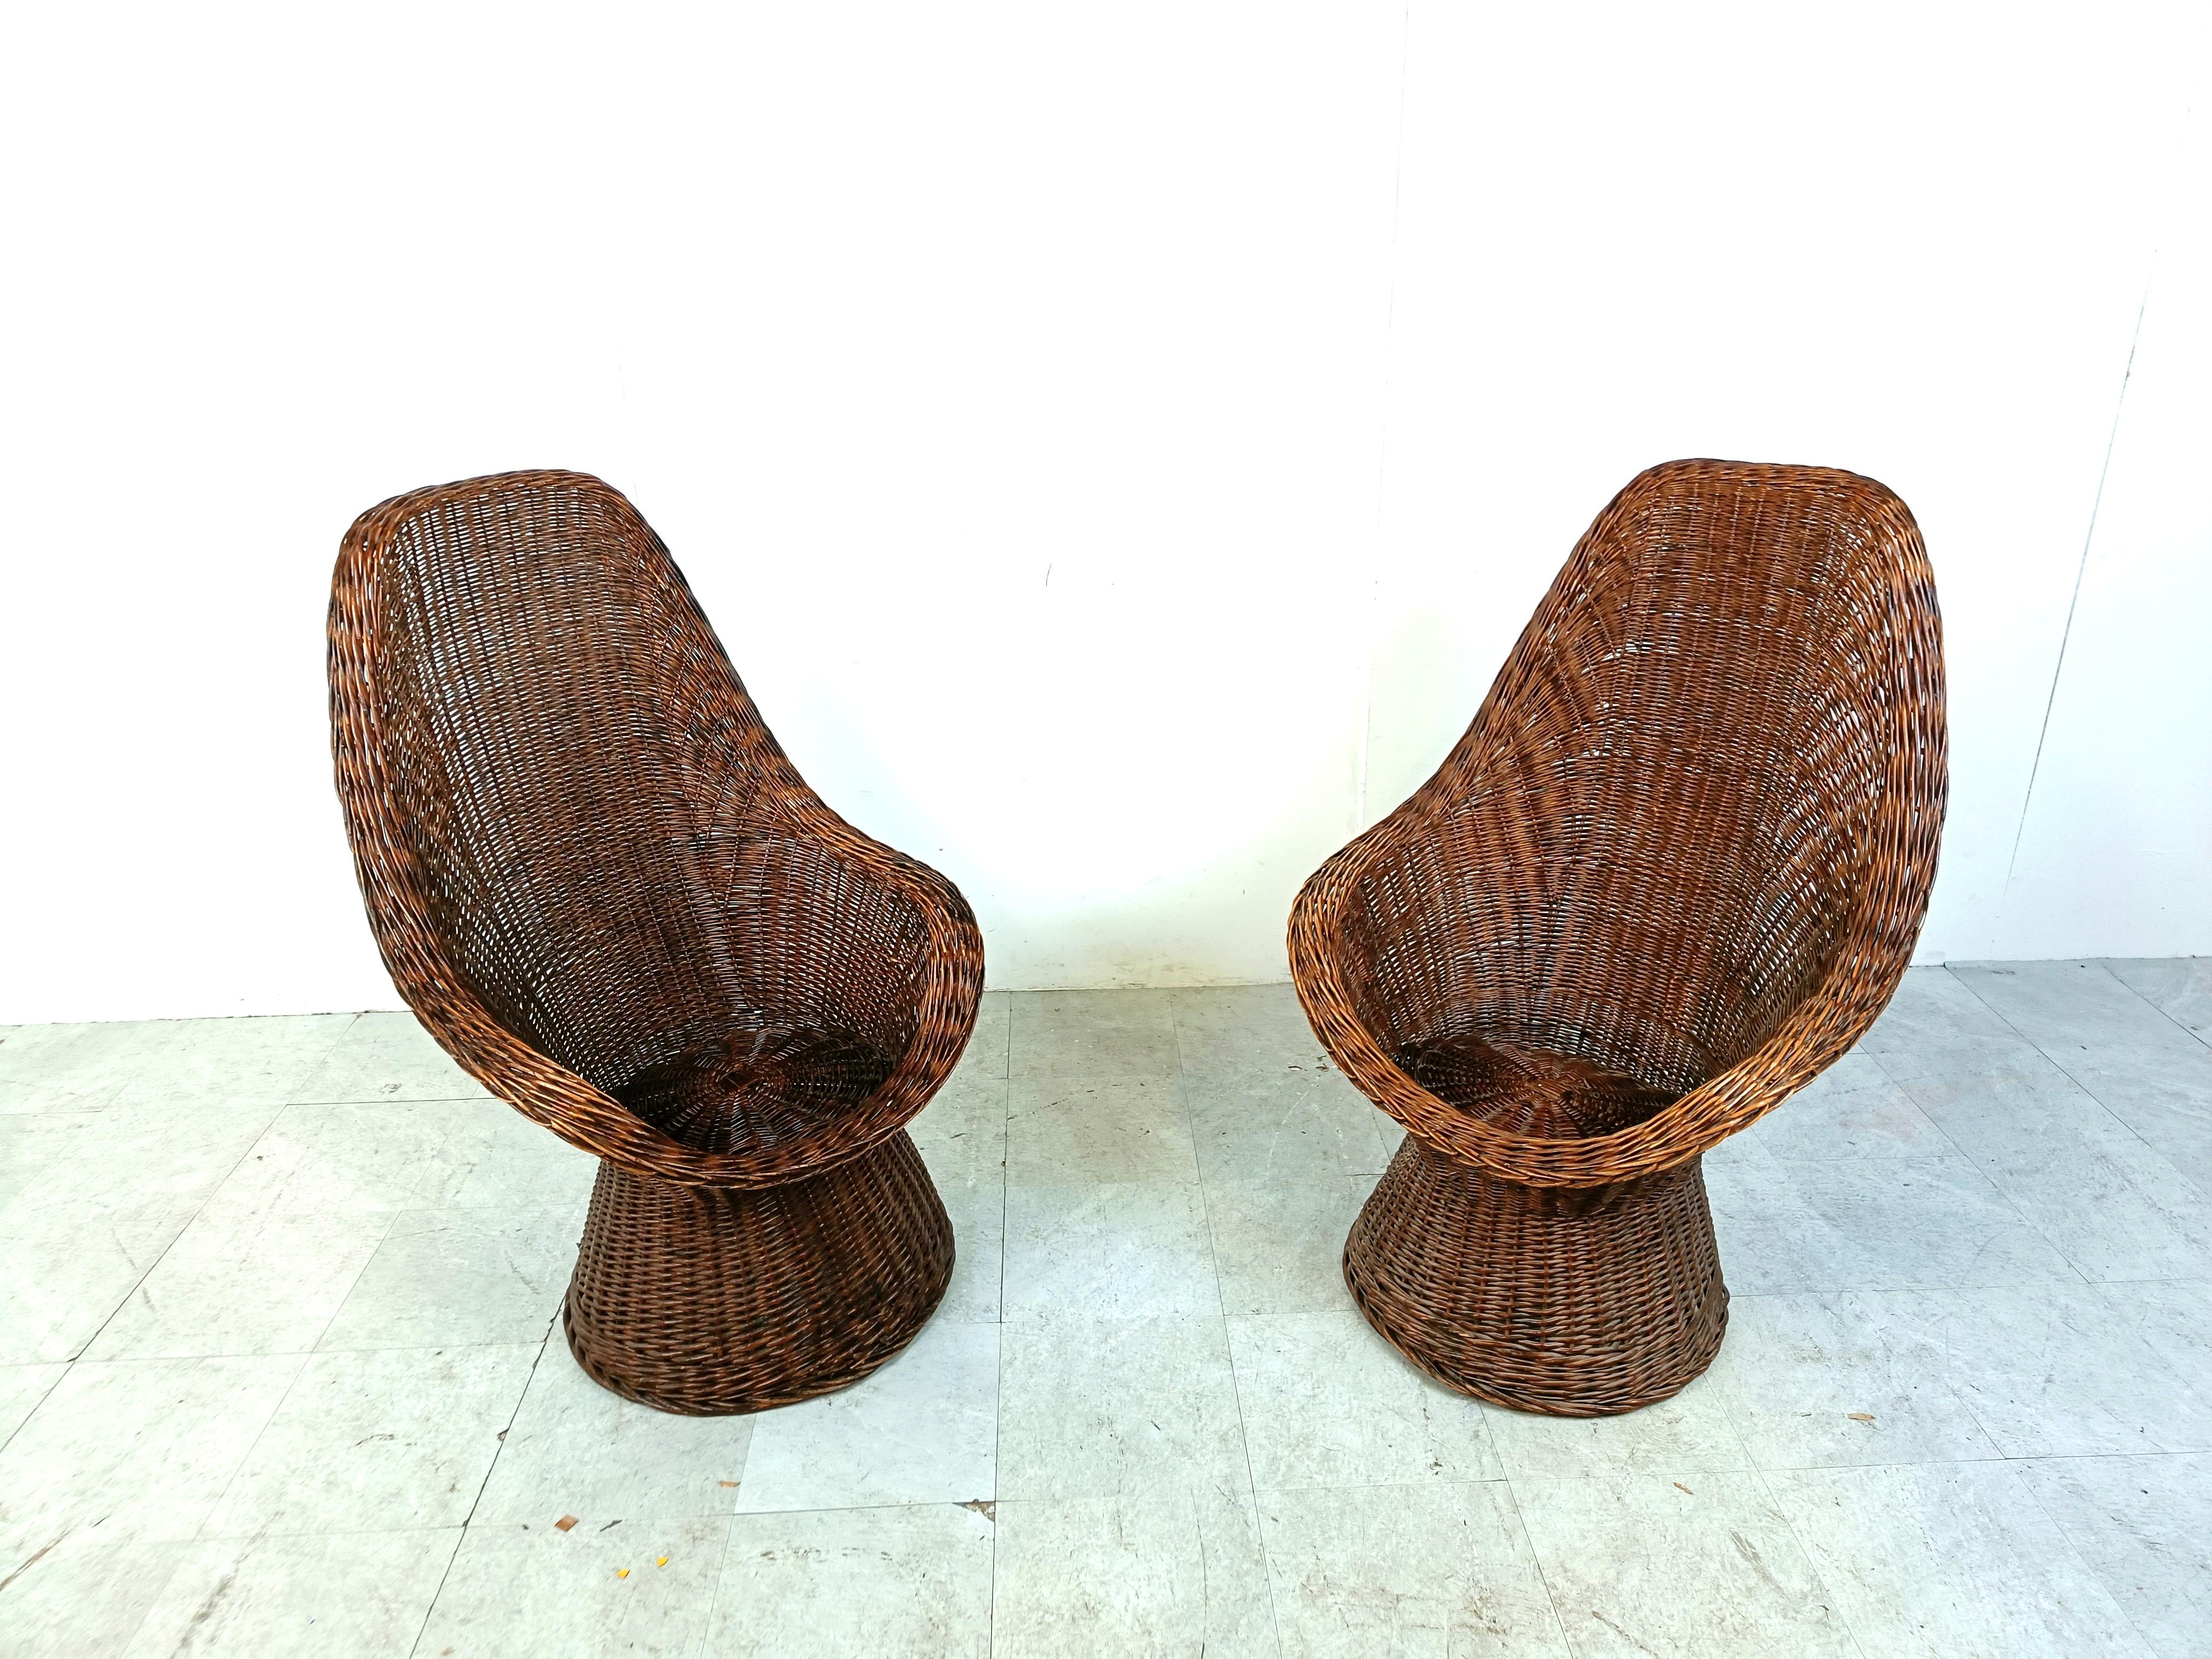 Unique high-back wicker lounge chairs.

Beautifully designed.

Good condition.

1960s - Belgium

Height: 110cm
Width: 70cm
Depth: 50cm
Seat height: 35cm

Ref.: 102544

*price is for the pair